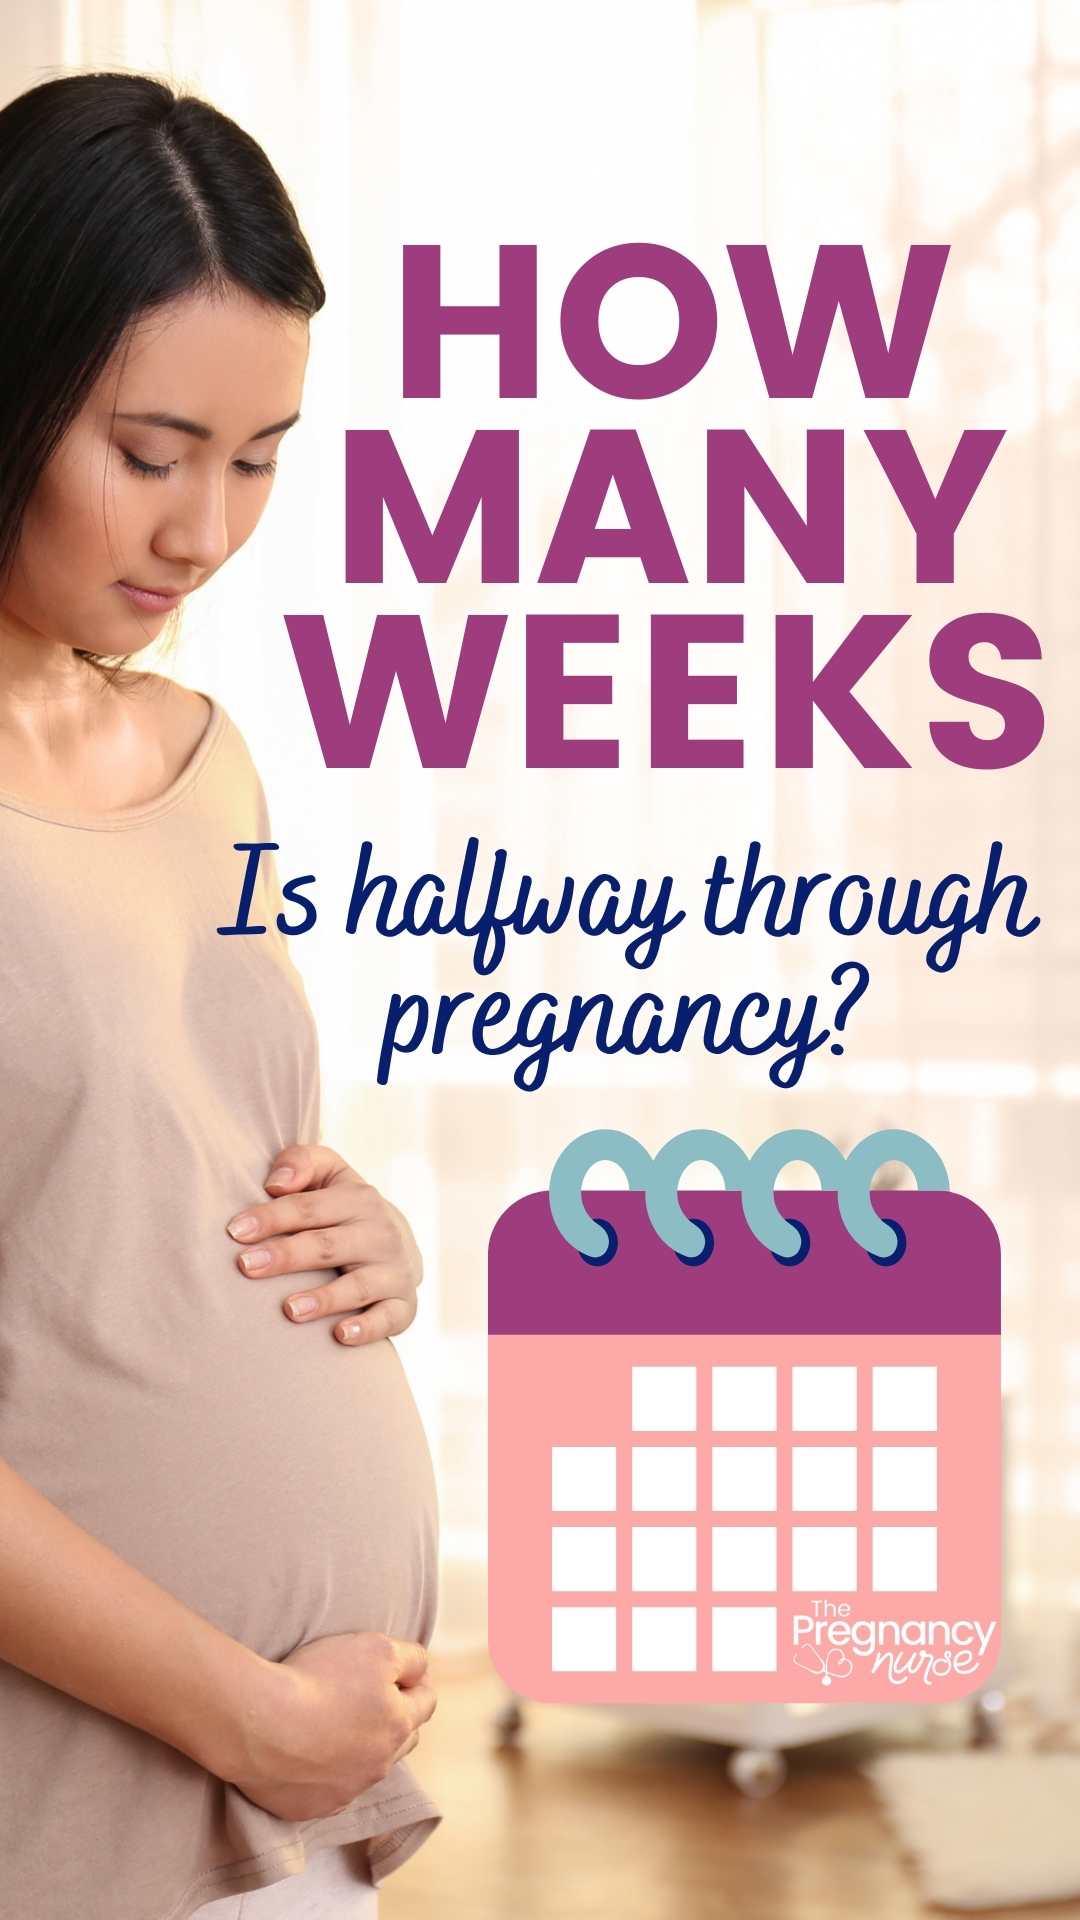 Don't worry, you still have plenty of time to prepare for your little one's arrival. This guide will give you everything you need to know about the halfway point of your pregnancy and what comes next. From fetal development milestones to tips for a healthy pregnancy, we've got you covered.